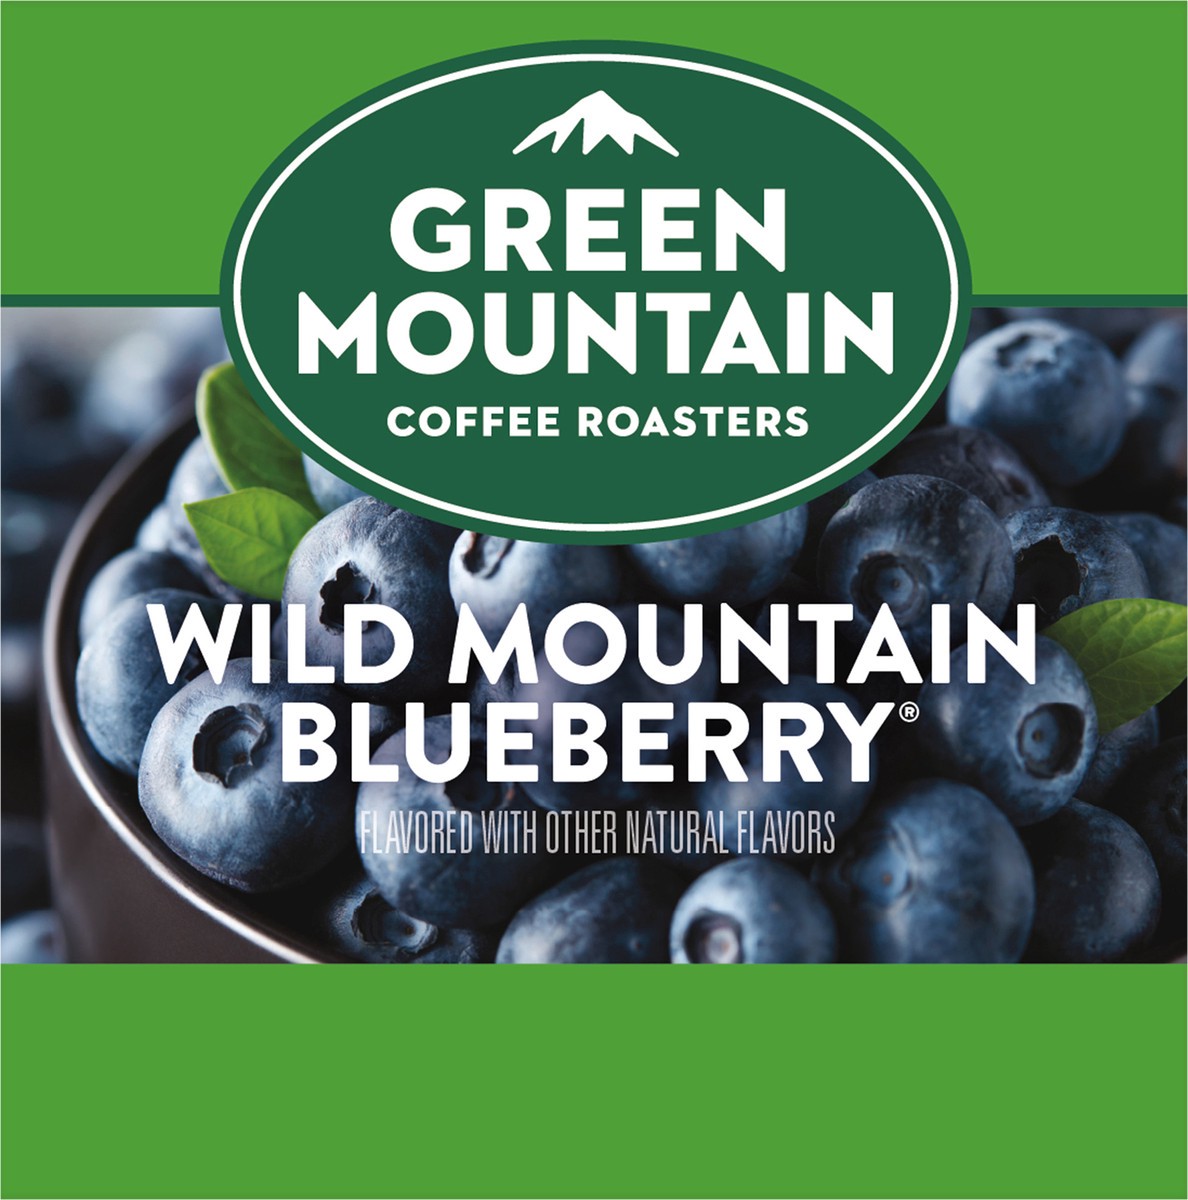 slide 5 of 7, Green Mountain Coffee Roasters Wild Mountain Blueberry Keurig Single-Serve K-Cup pods, Light Roast Coffee, 12 Count, 12 ct